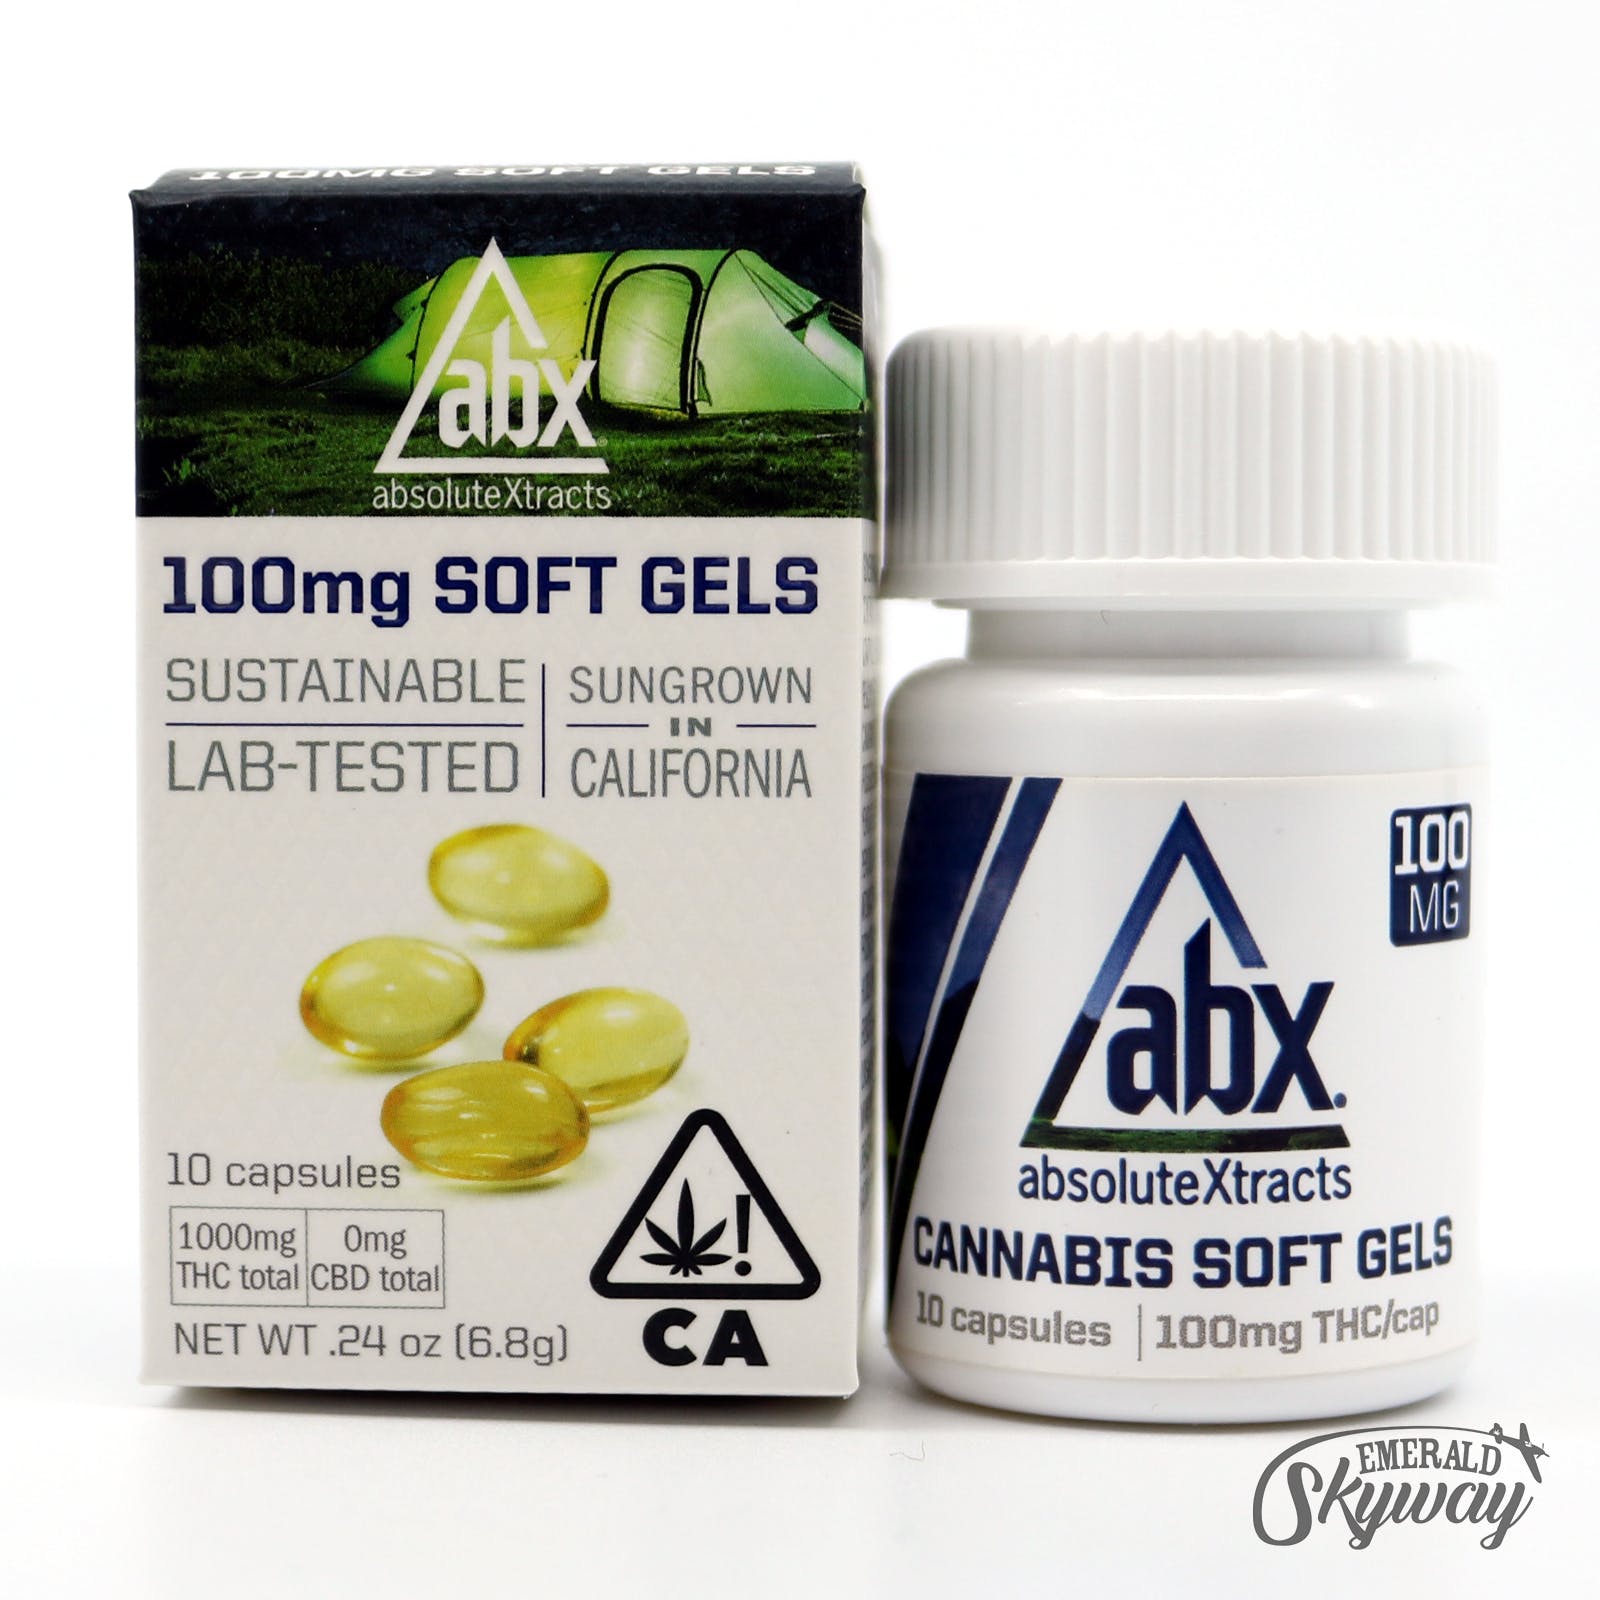 AbsoluteXtracts: 100mg Soft Gels - 10 count